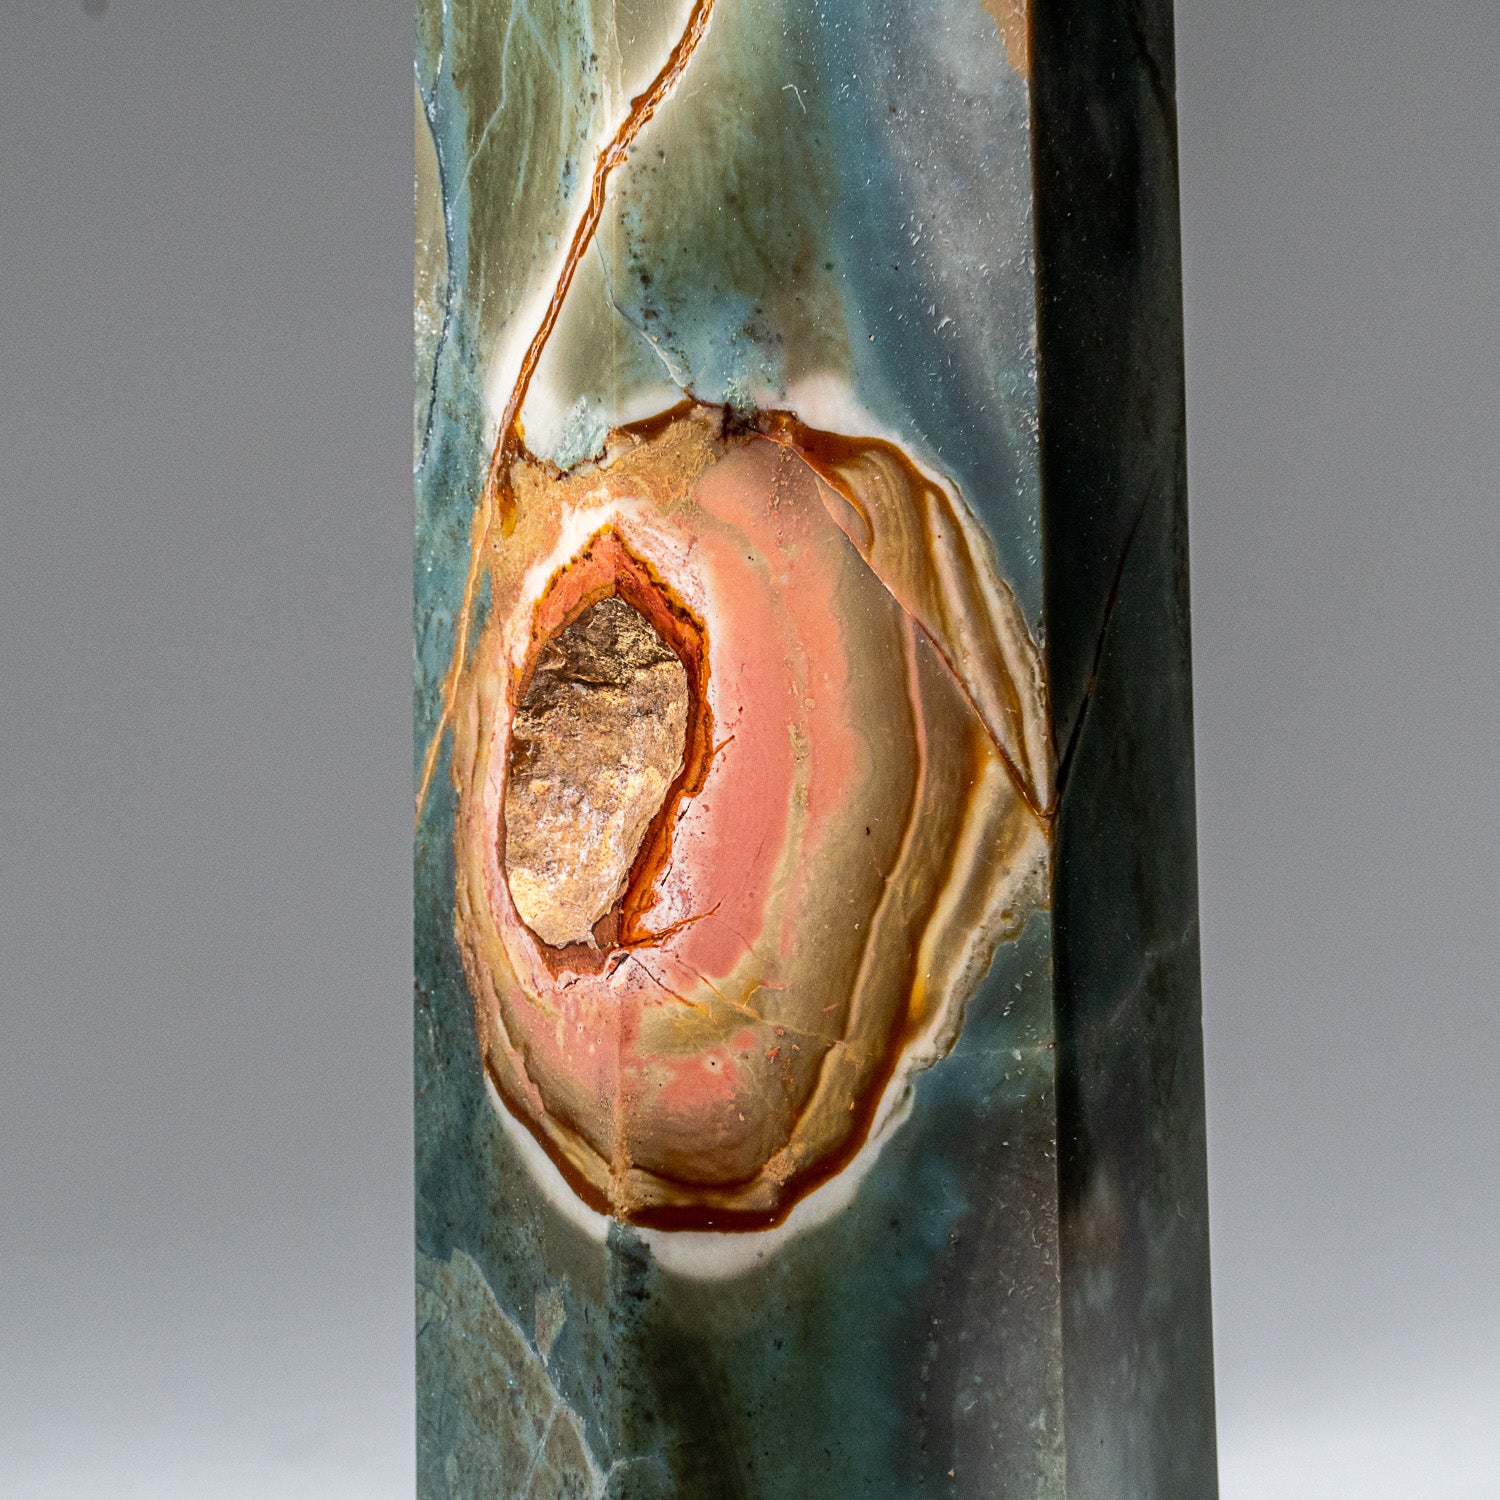 Polished Polychrome Point from Madagascar (2.1 lbs)